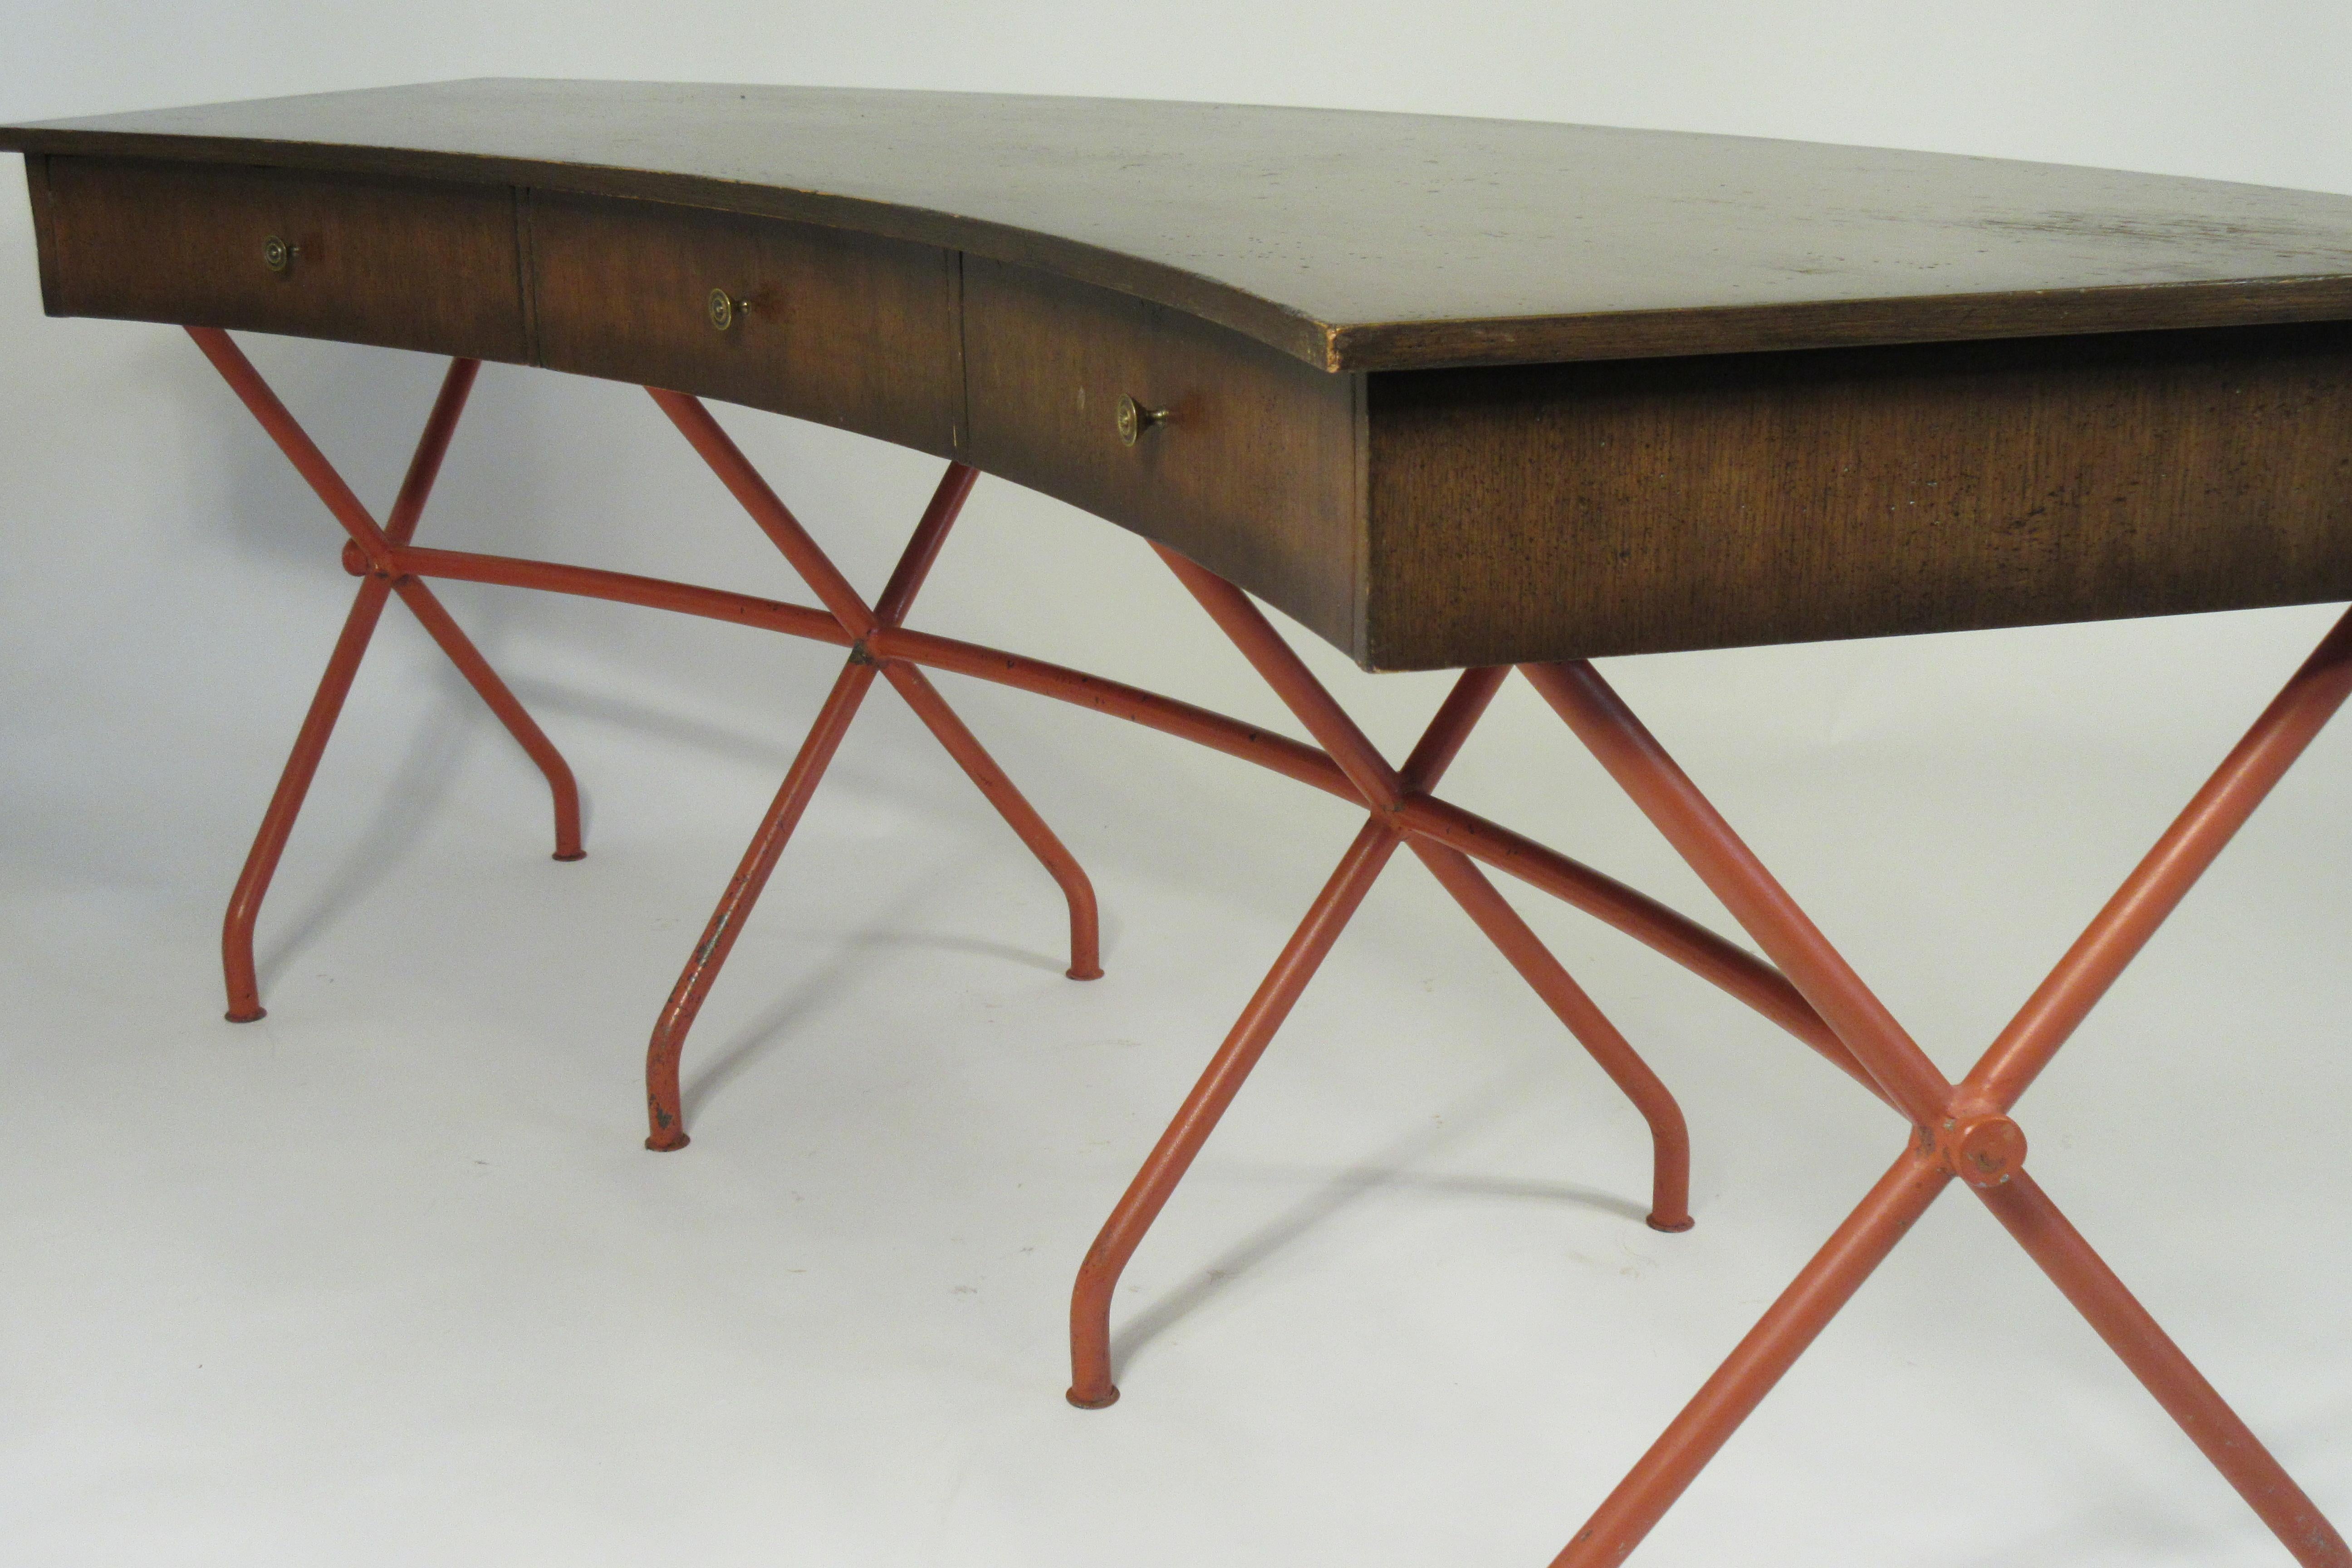 1960s curved writing desk. Wood top, iron base. Out of a huge Scarsdale, NY mansion. Needs refinishing.